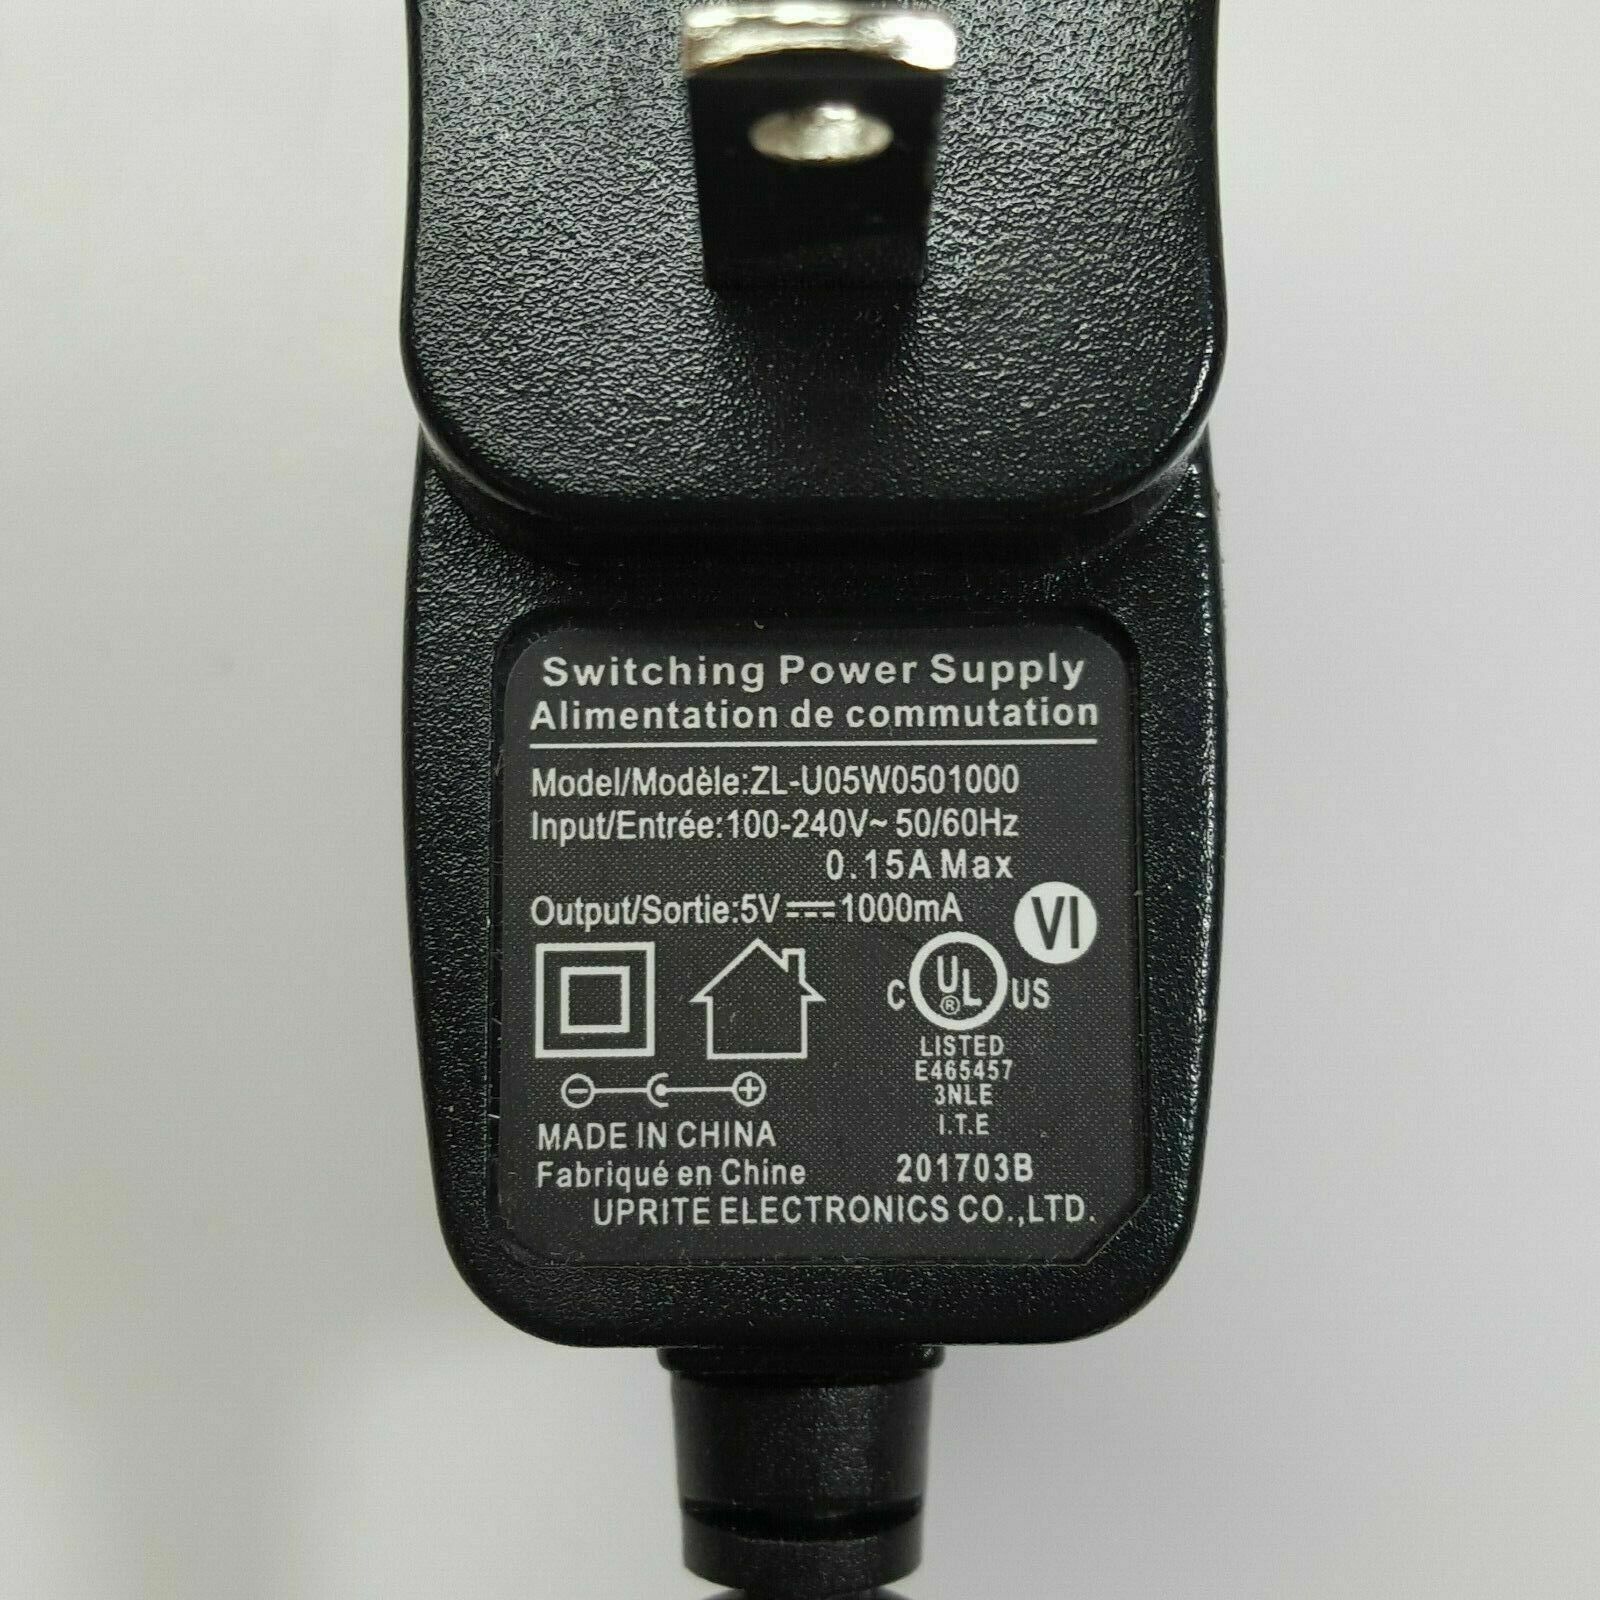 AC DC Power Supply Adapter Charger 5V 1000MA 1A ZL-U05W0501000 USA SELLER Type: Adapter Features: Powered Cable Le